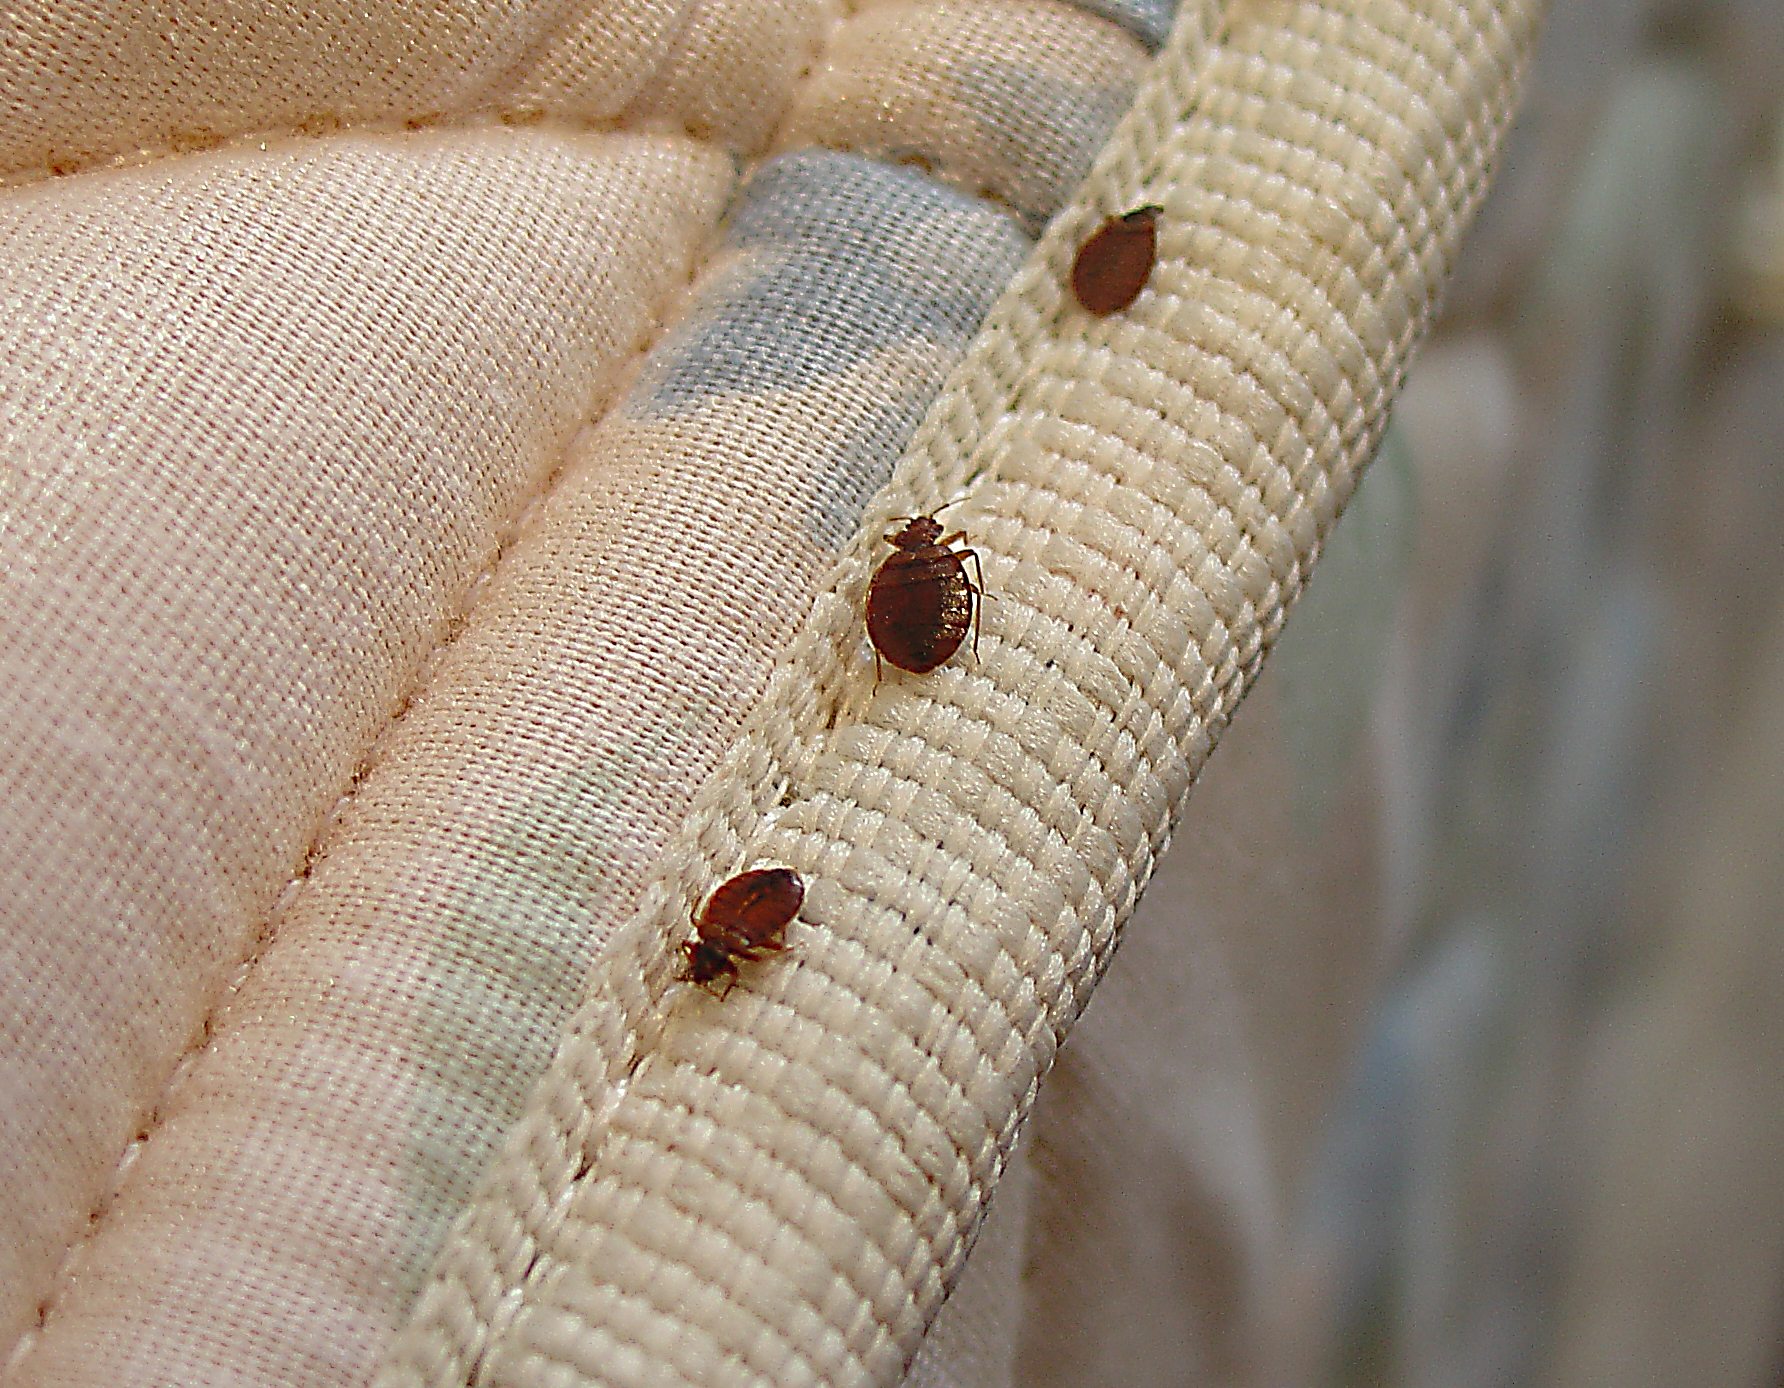 do bed bugs burrow into mattresses